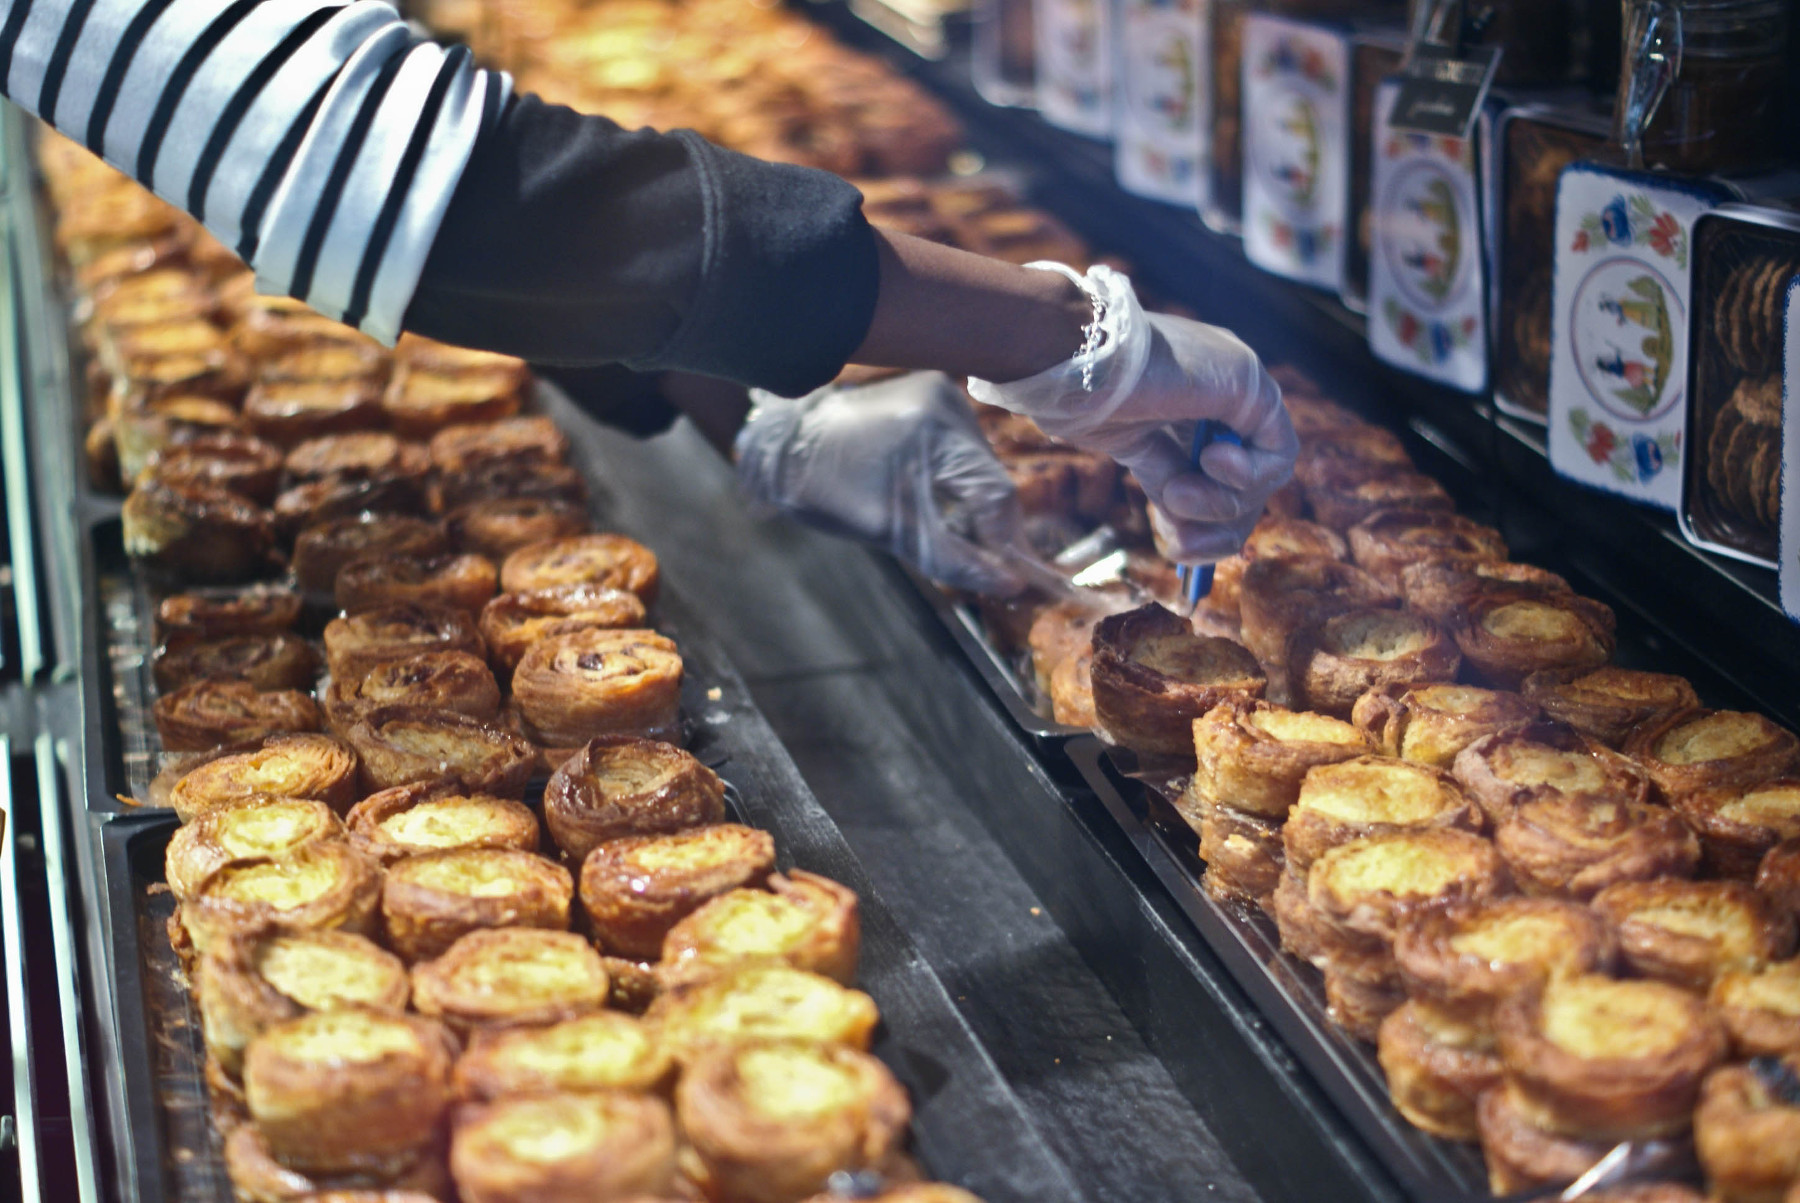 Kouign-amanns, Maison Larnicol’s specialties made of caramelised flaky pastry and filling